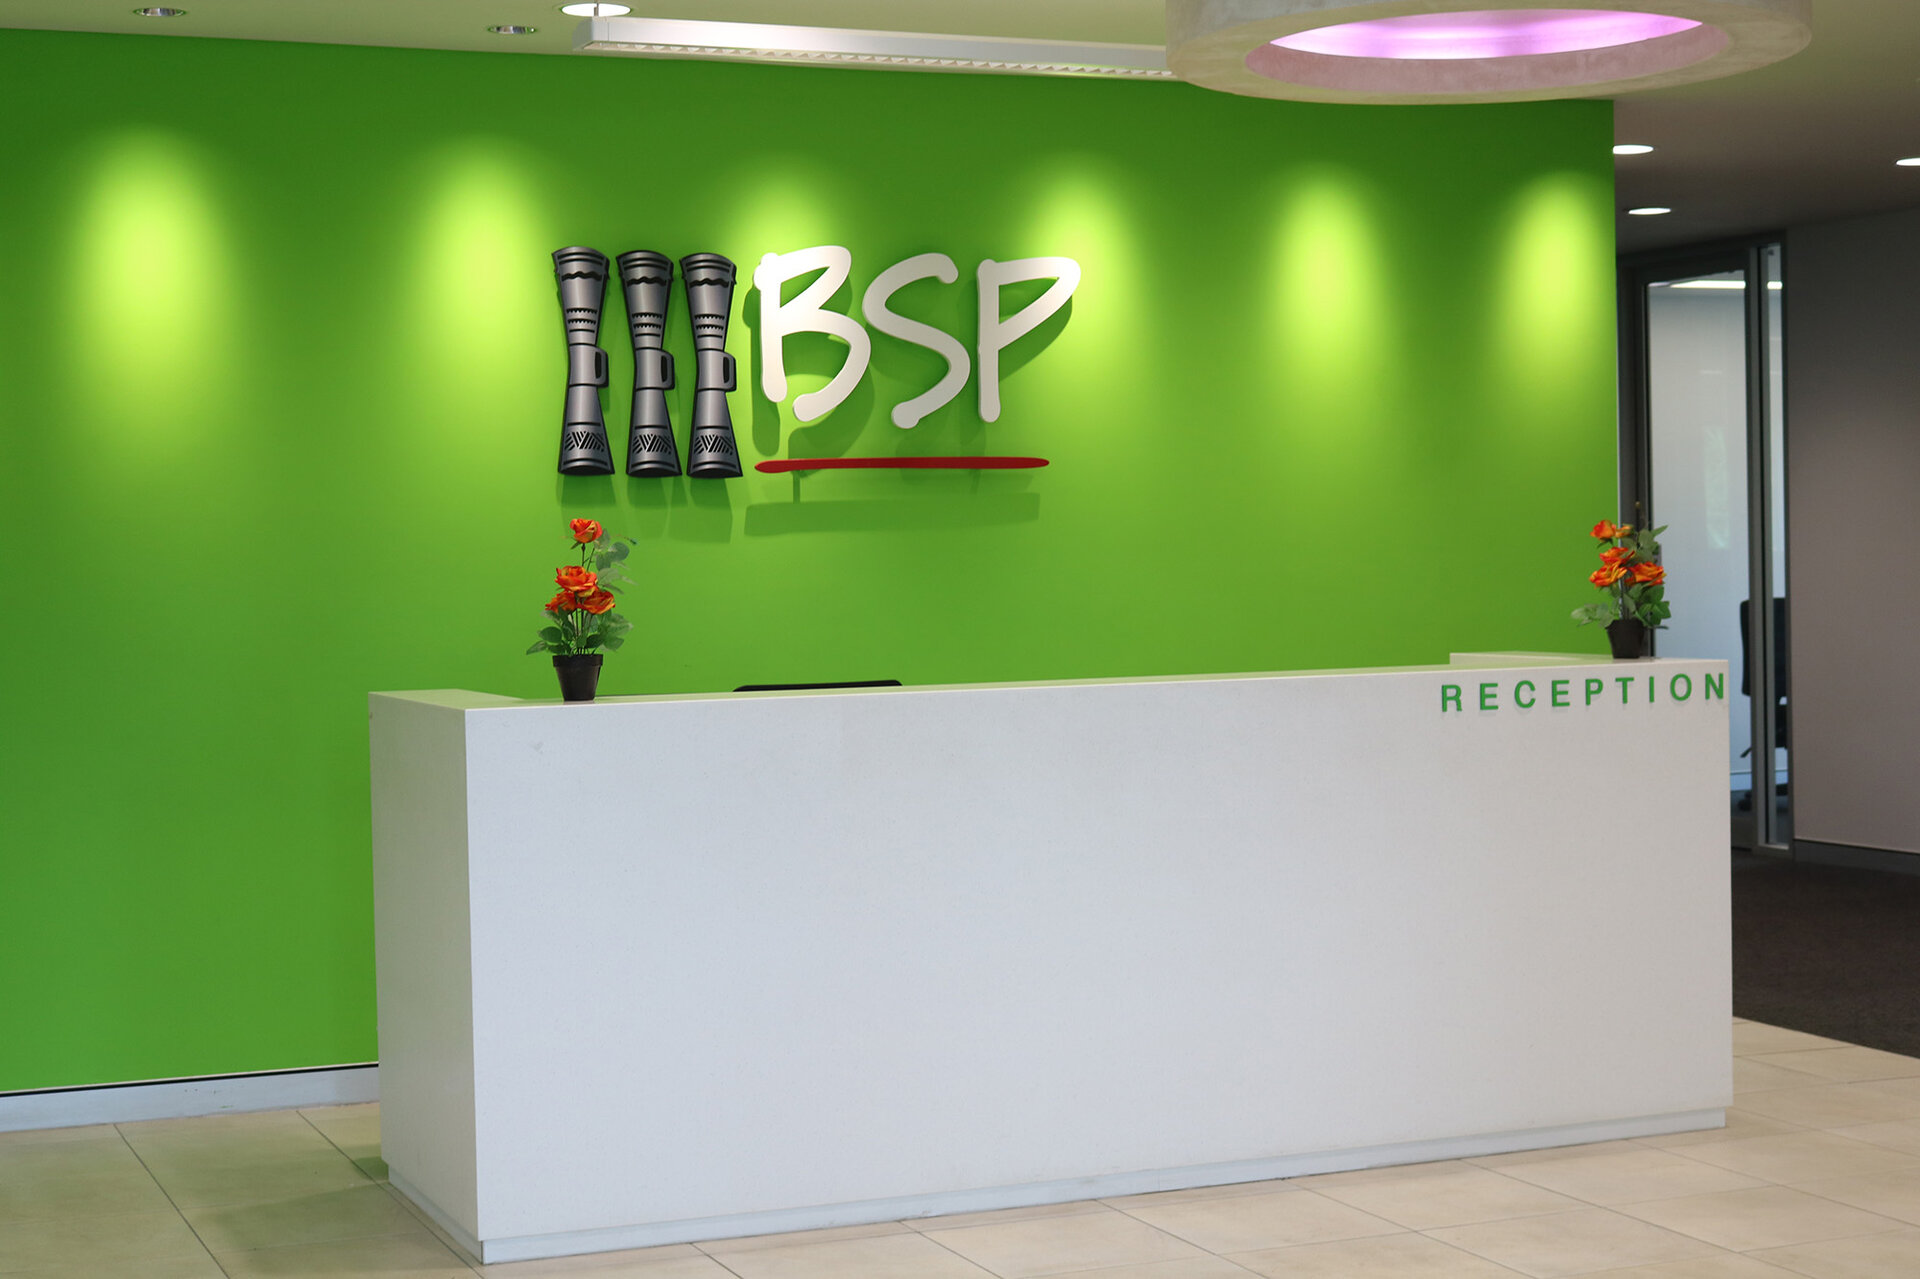 Interior of BSP building. A reception desk sits in front of a bright green wall with the BSP sign in the middle.